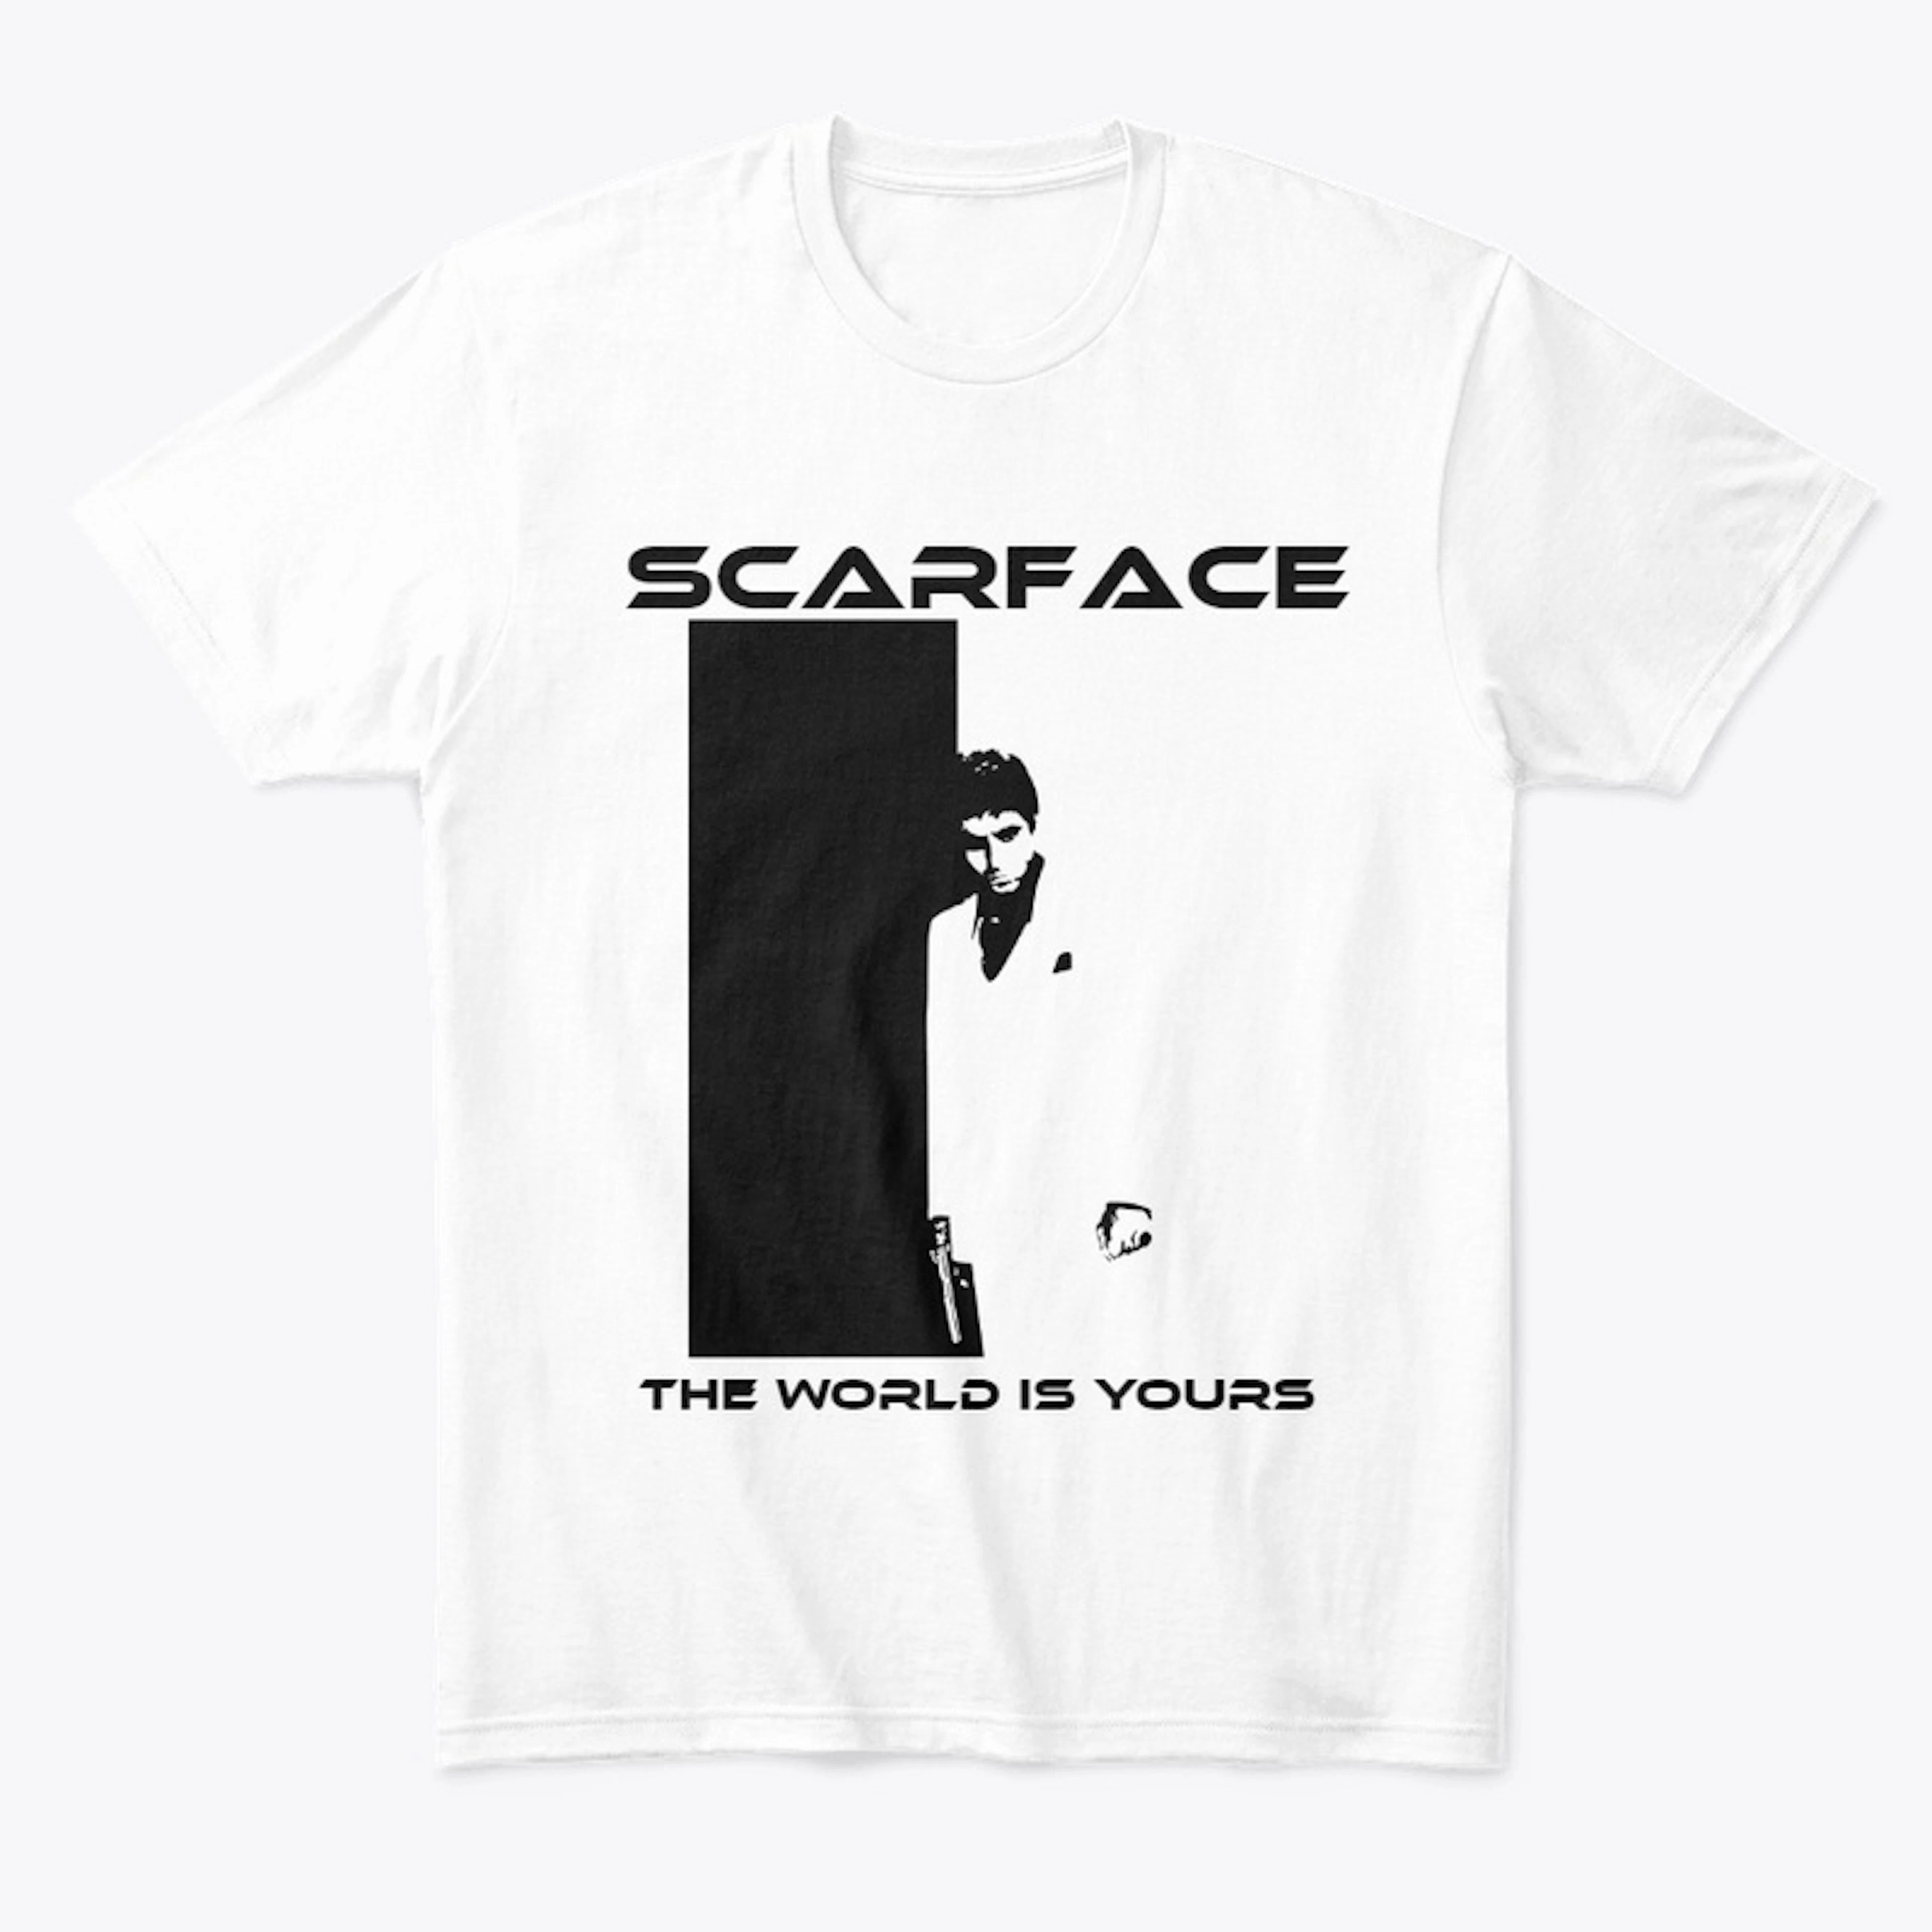 Scarface "the world is yours"